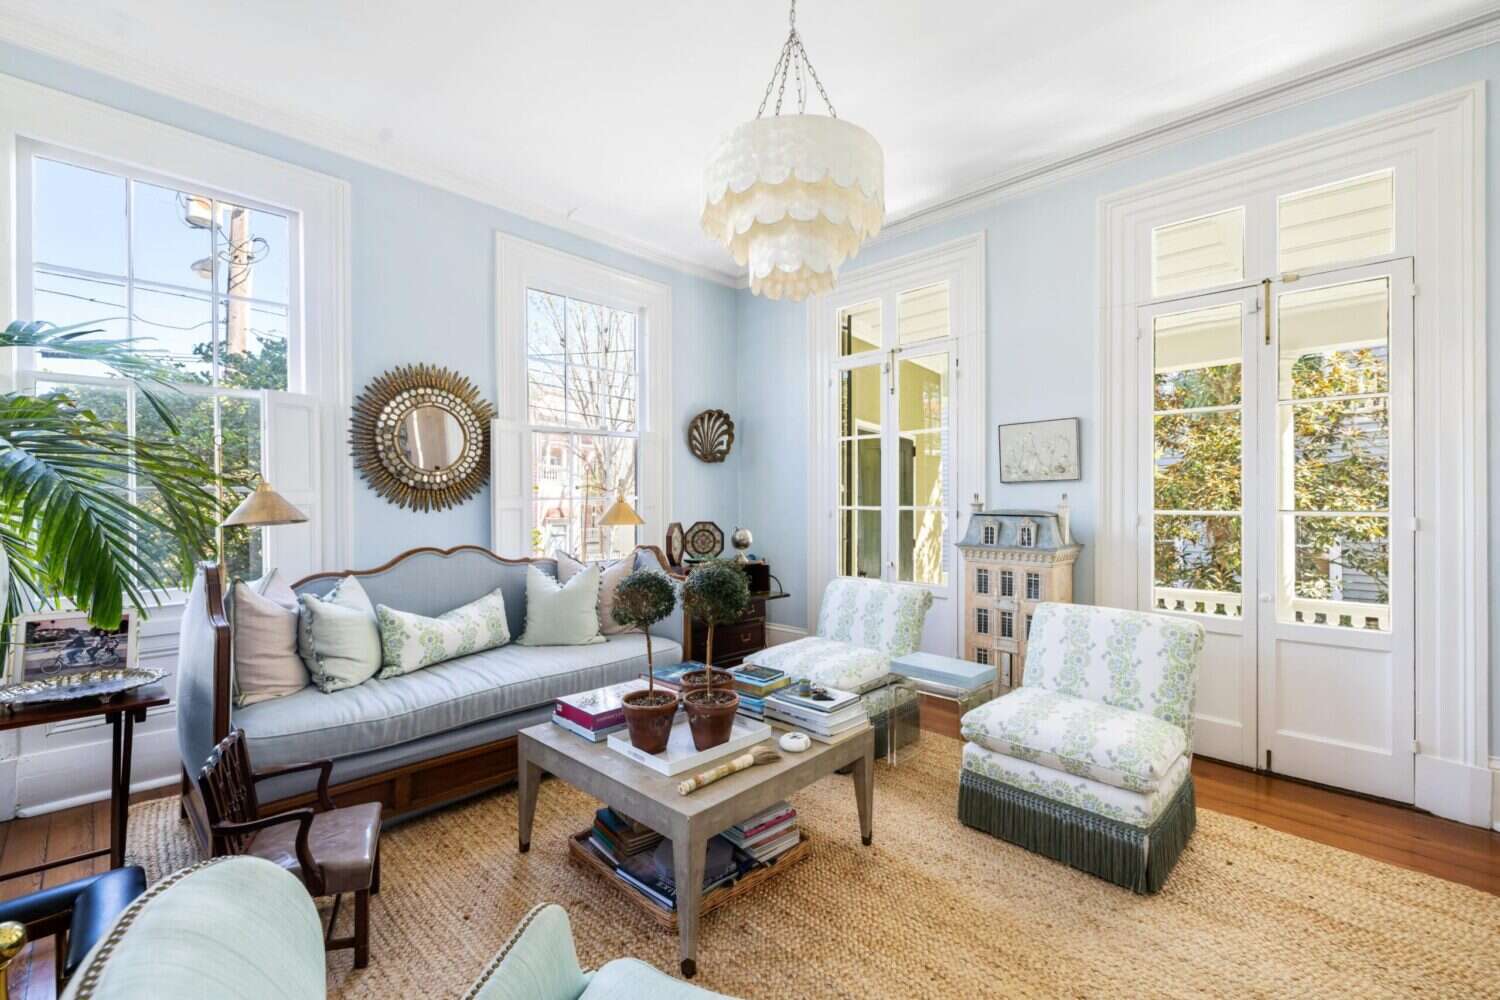 This Historic Home is Full of Charleston Charm